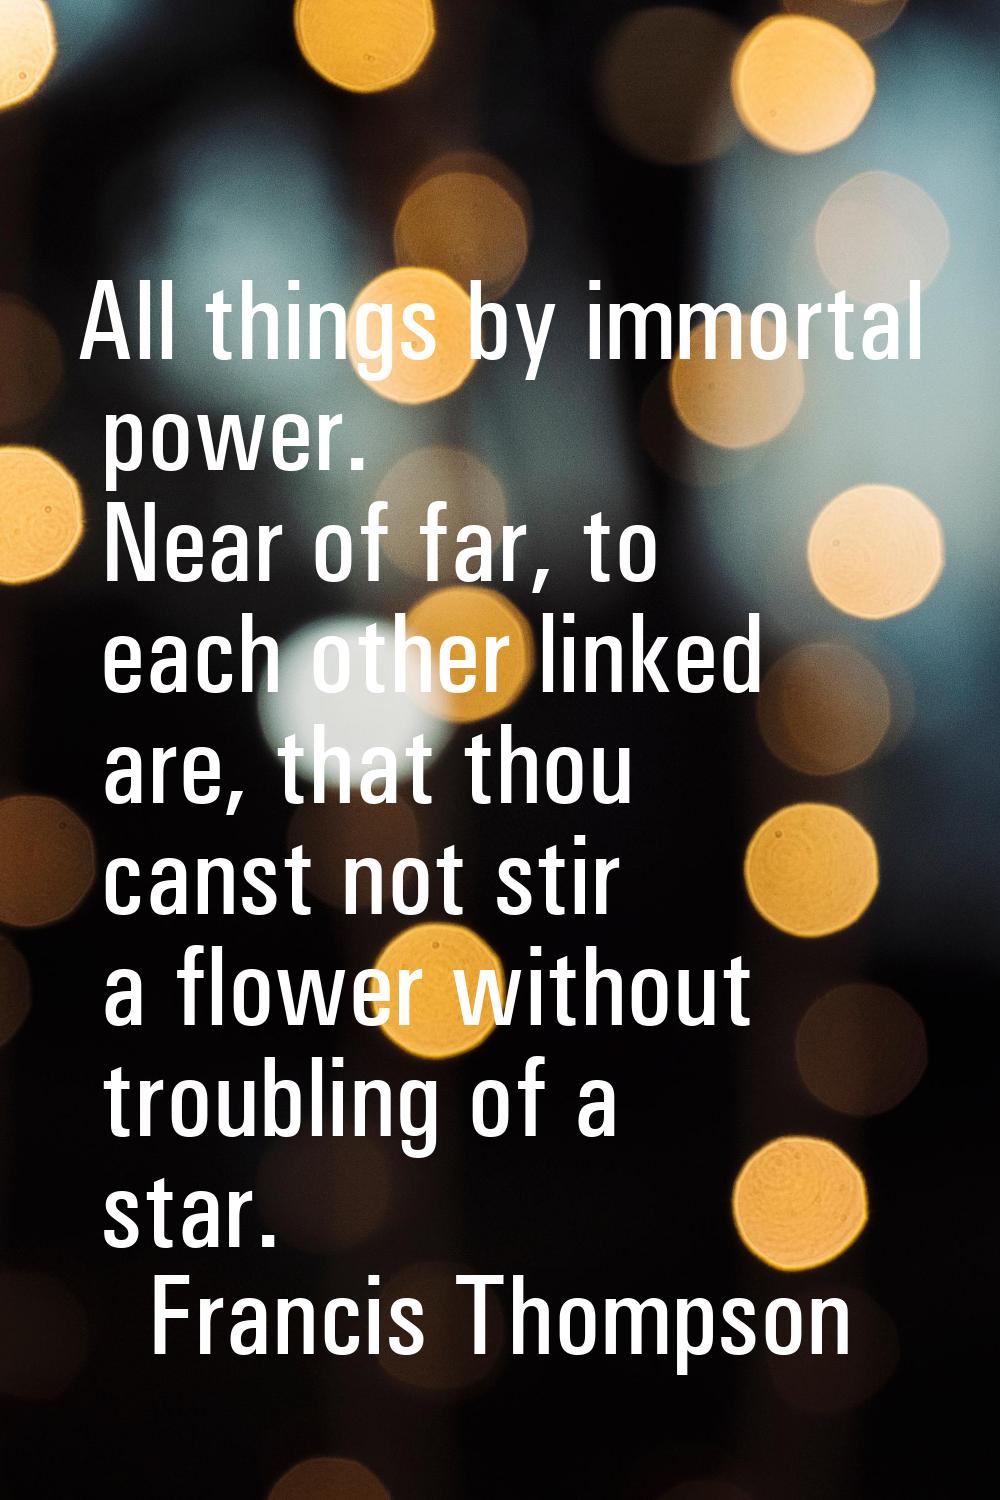 All things by immortal power. Near of far, to each other linked are, that thou canst not stir a flo